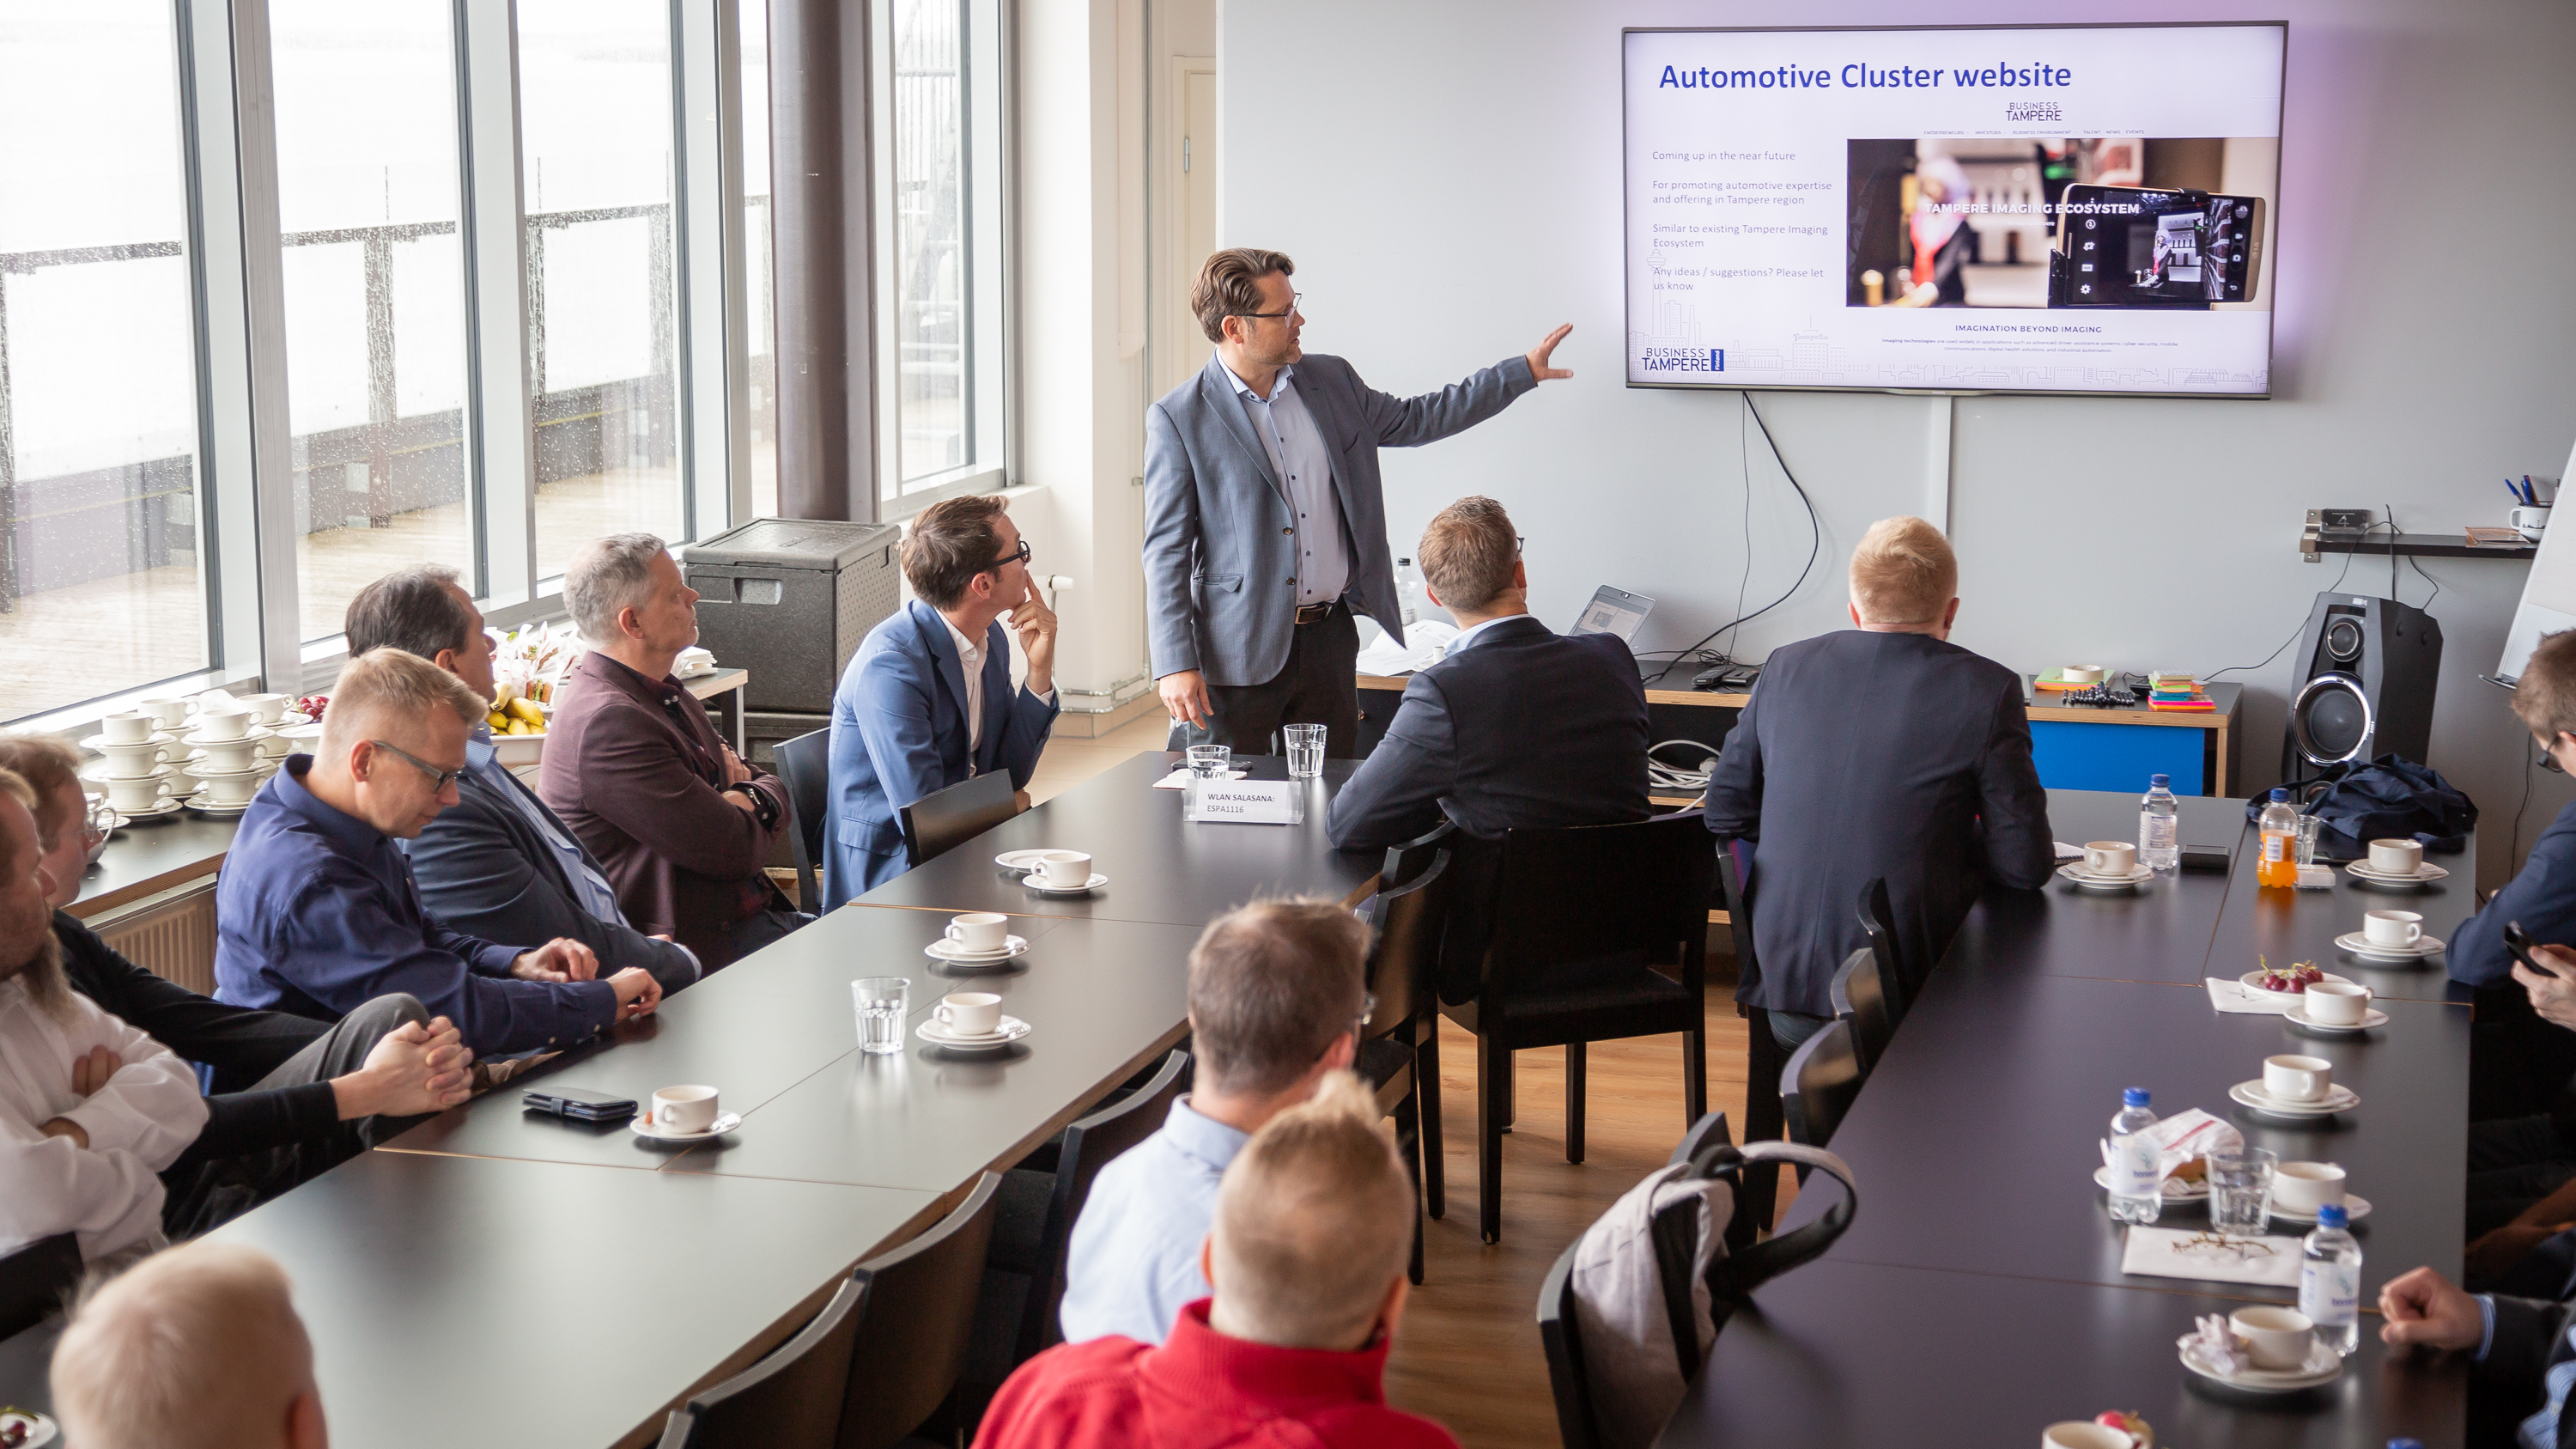 Business Tampere Automotive Cluster, September 2019. Photo: Mirella Mellonmaa